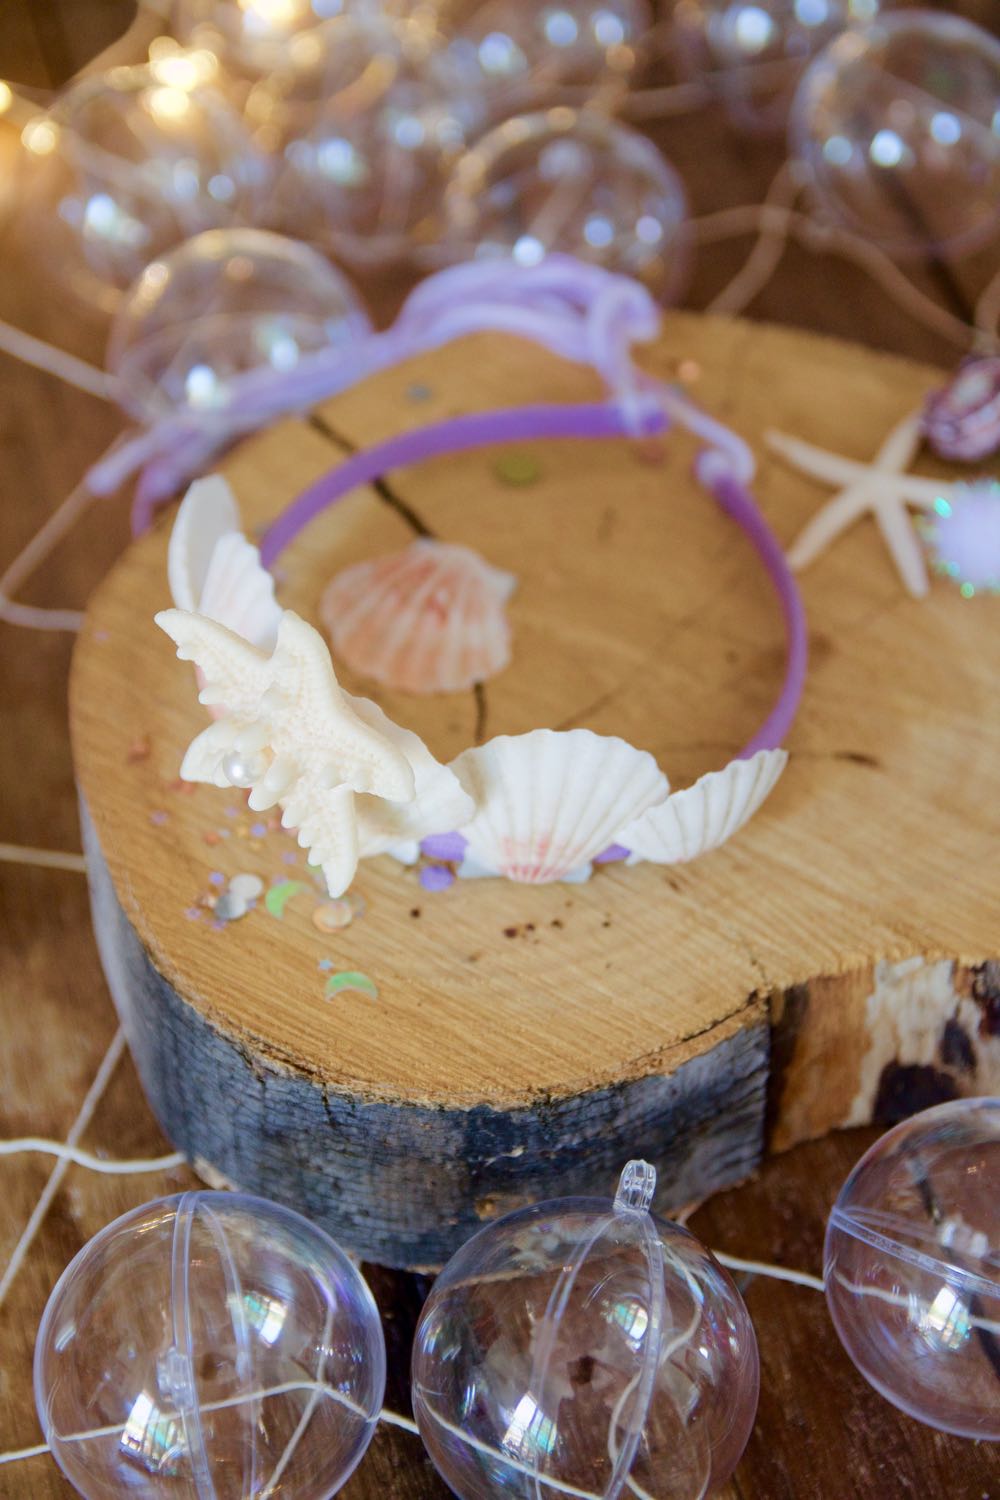 How to make a seashell crown out of a headband